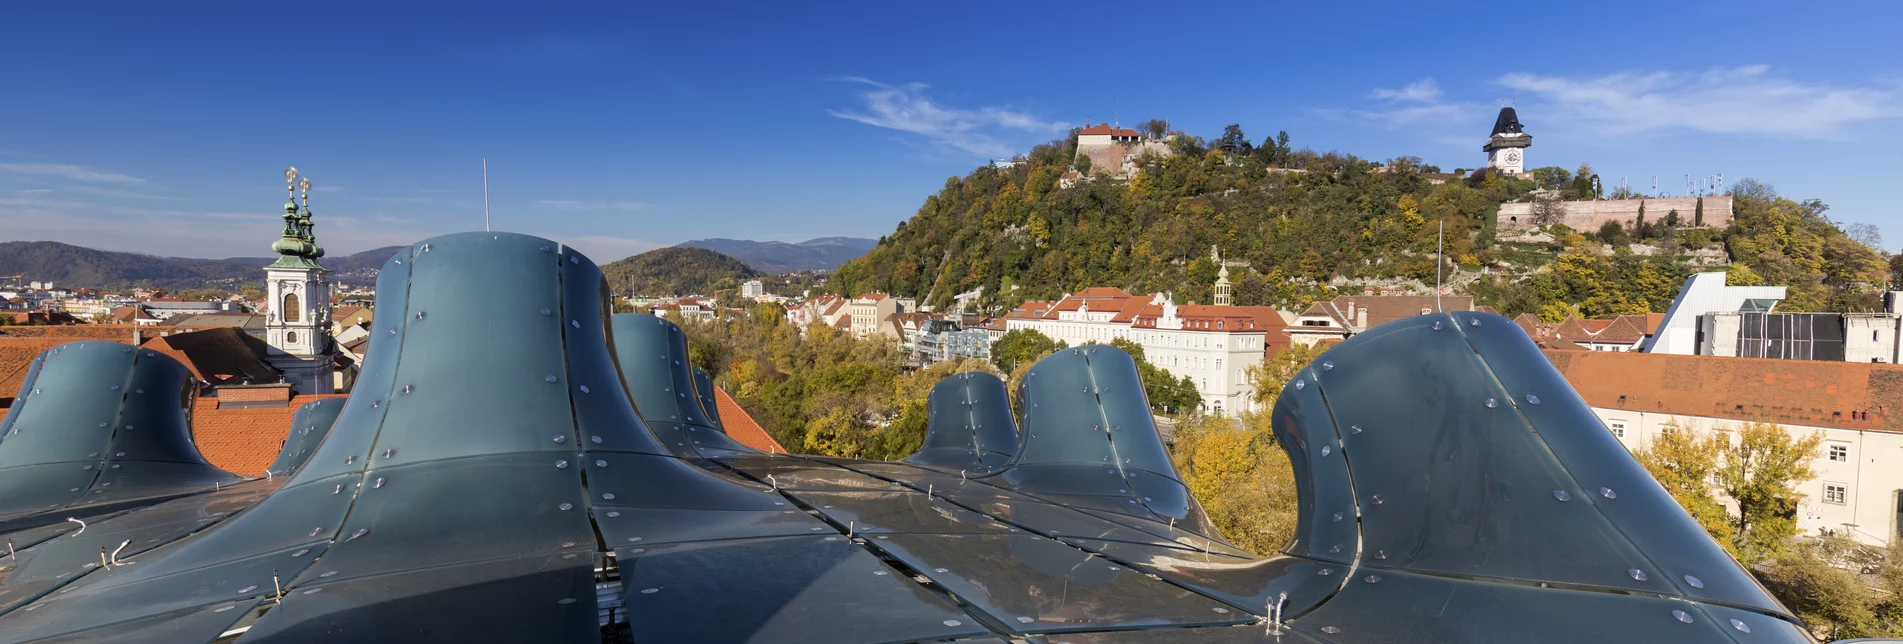 Graz with Kunsthaus and Schlossberg together with Clock Tower and Mariahilfer Church | © Steiermark Tourismus | Harry Schiffer